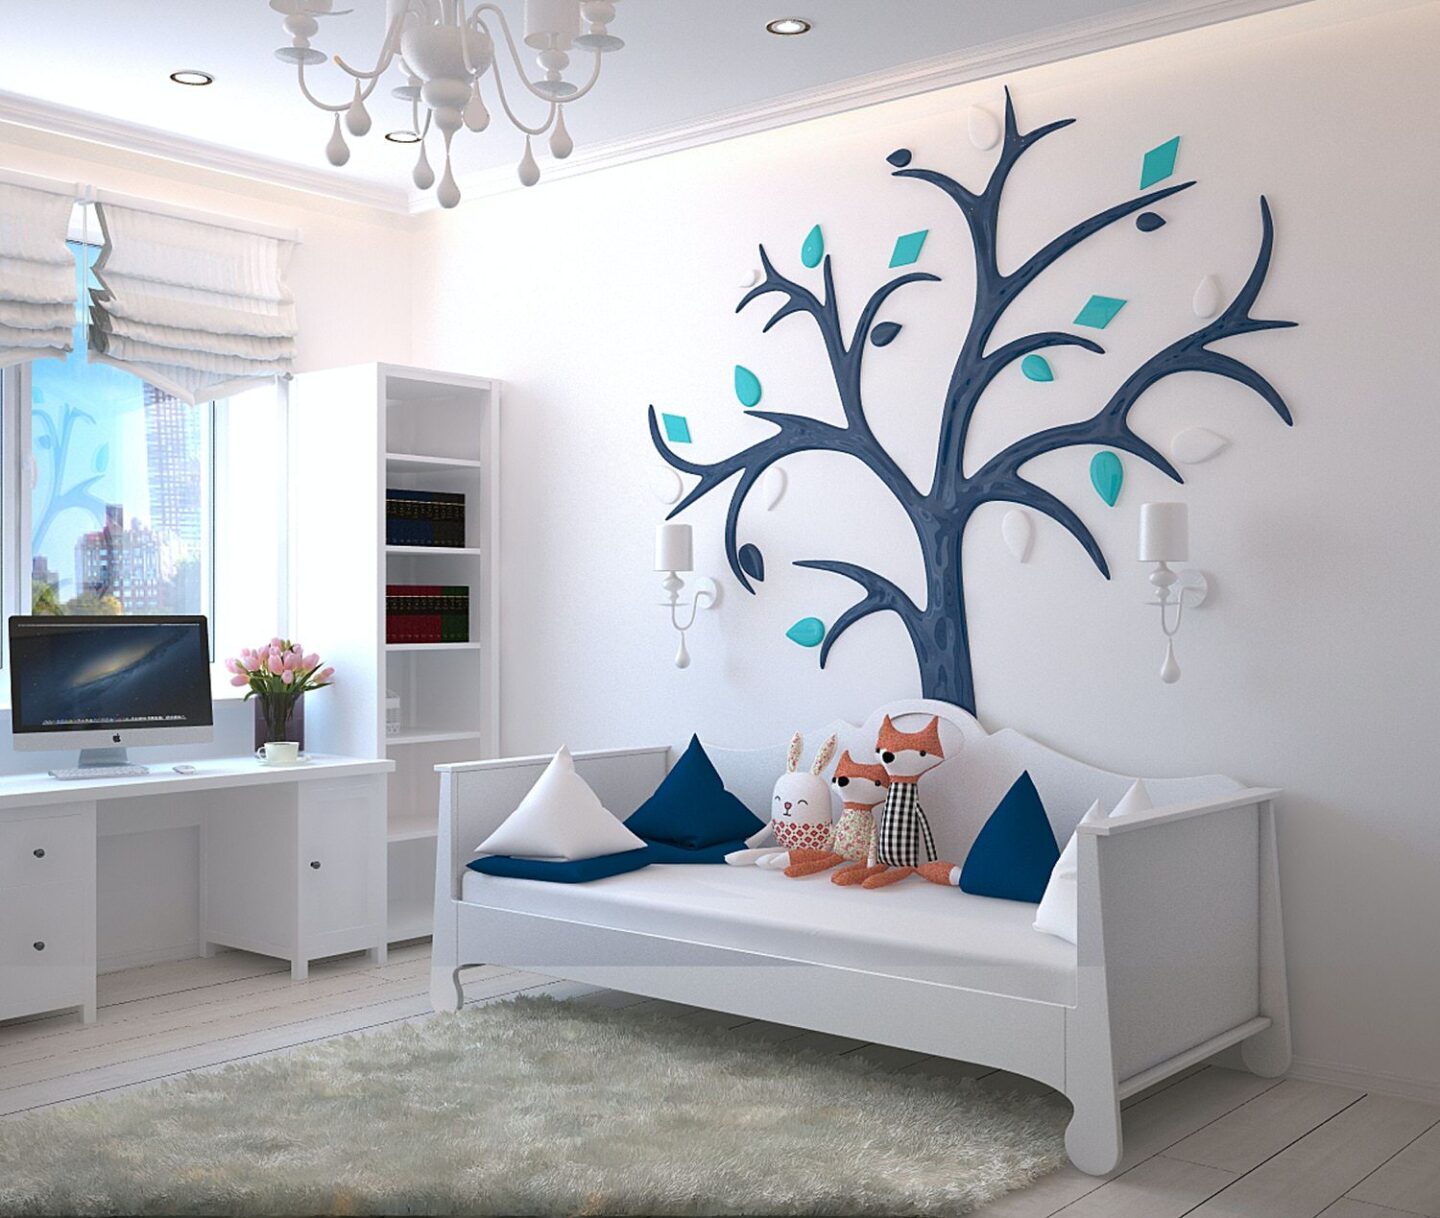 Designing With Kids In Mind: Easy-To-Clean Surfaces And Spaces For Your Home